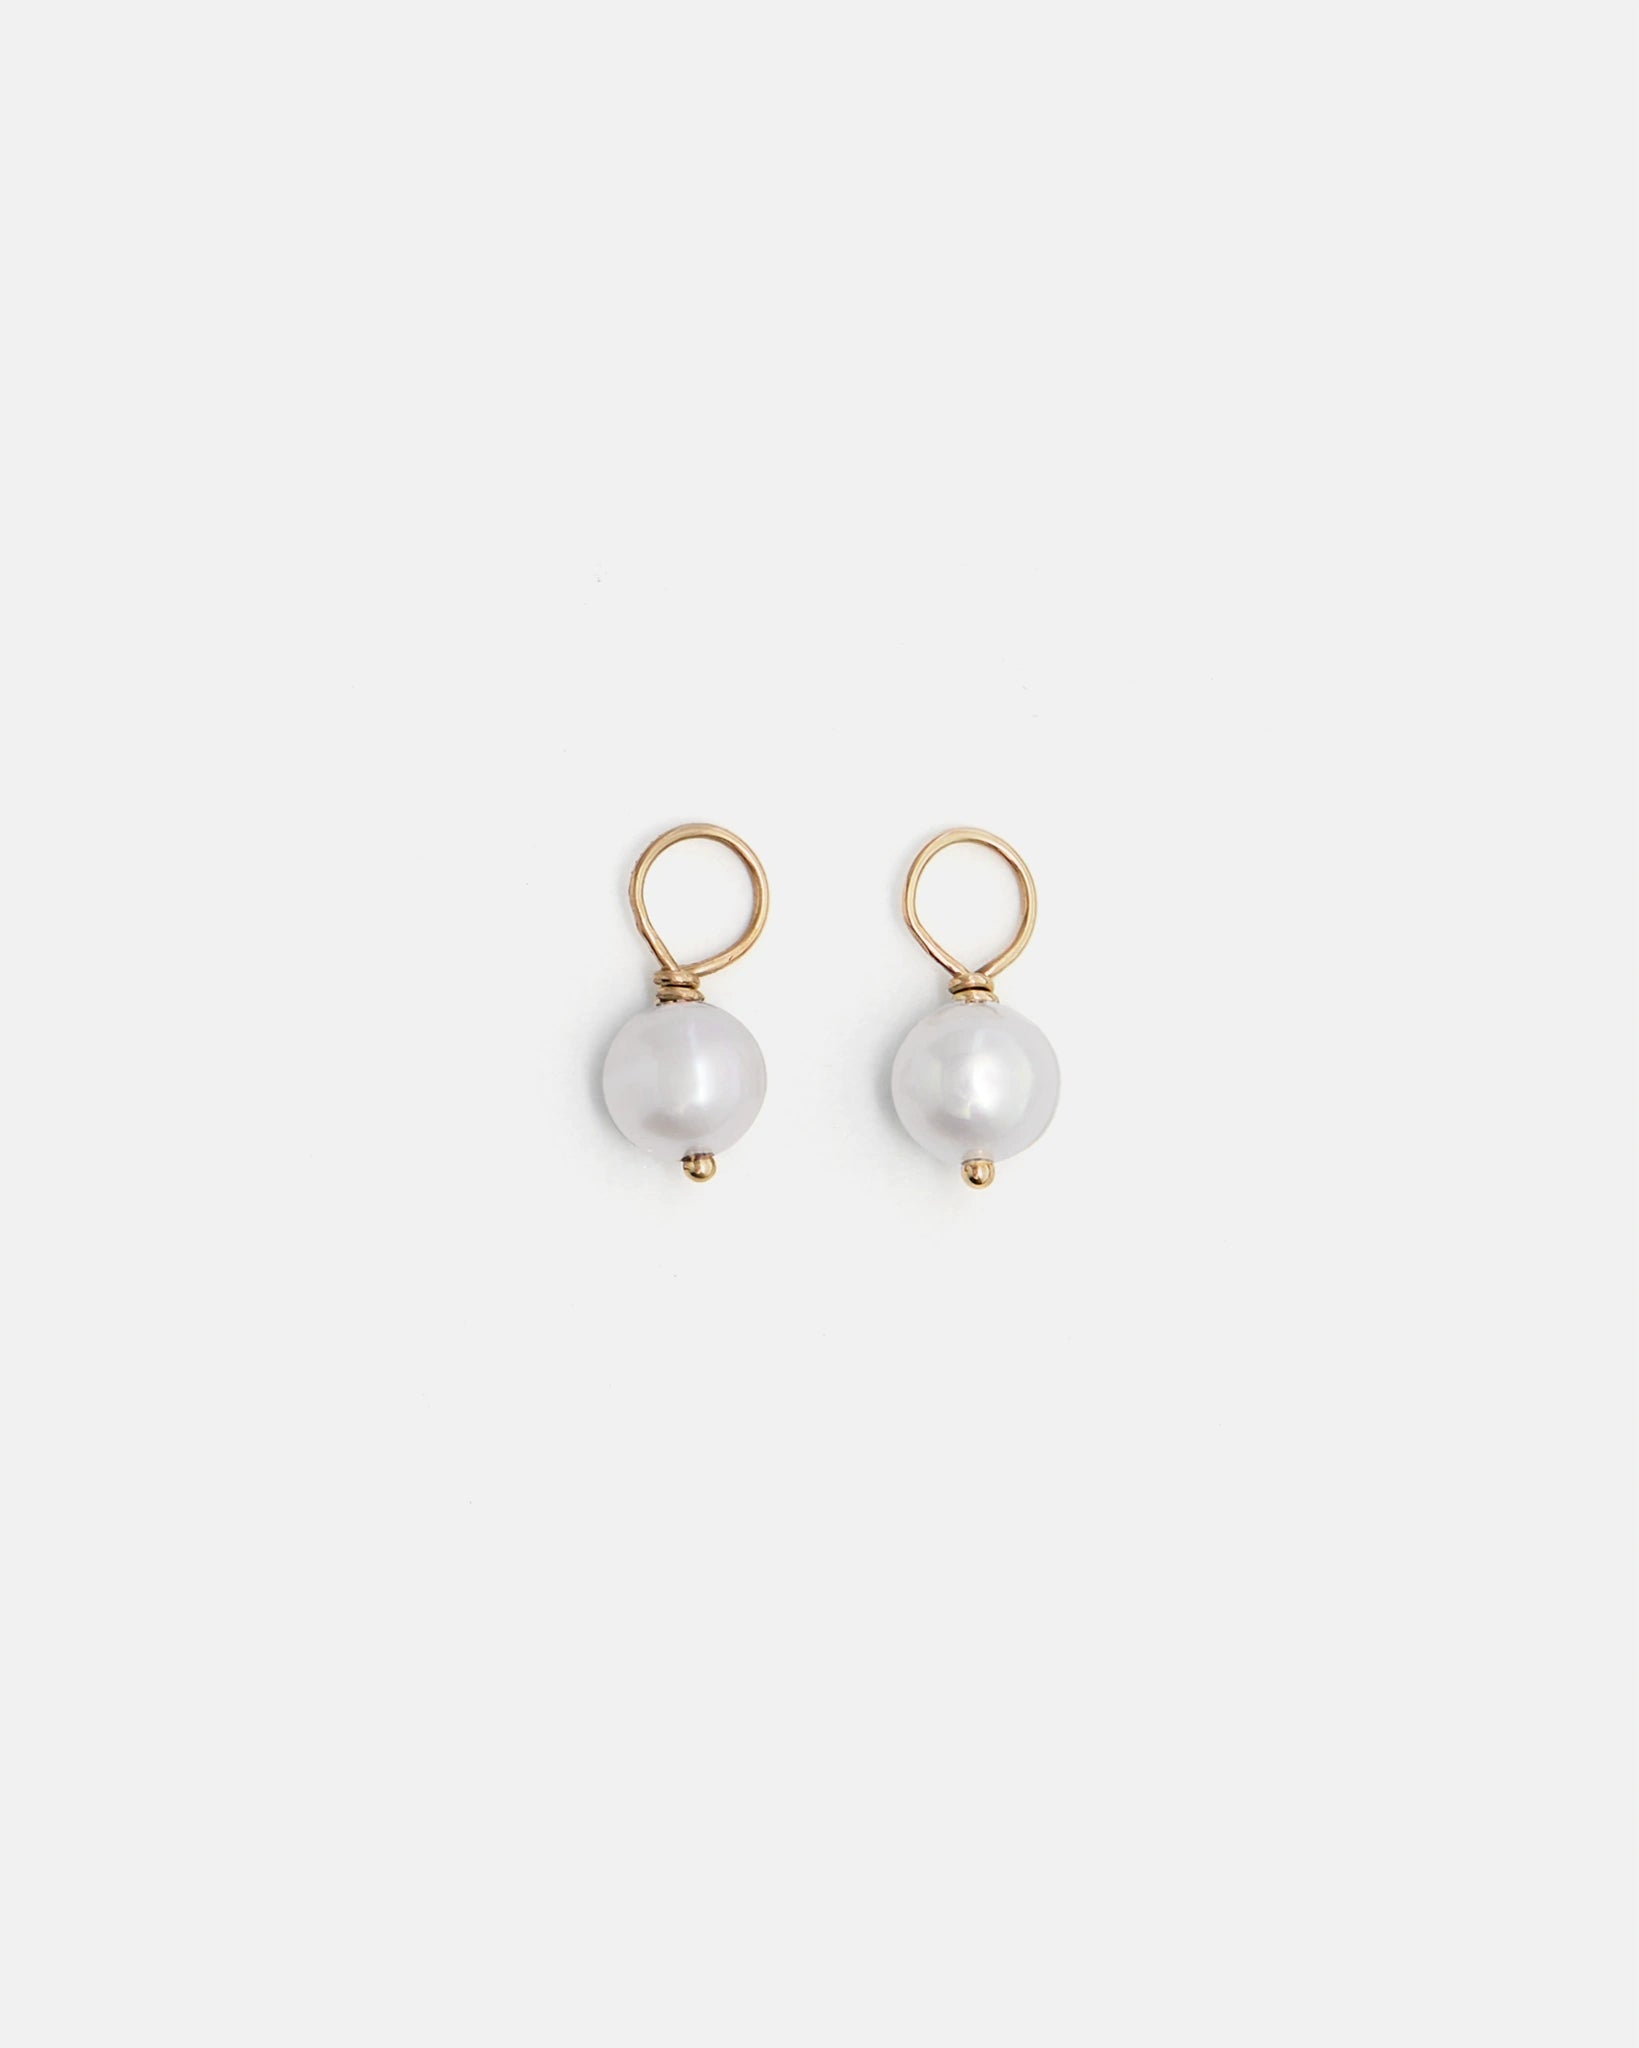 Pom-pom Pendants for Hoops in Gold with Freshwater White Pearls